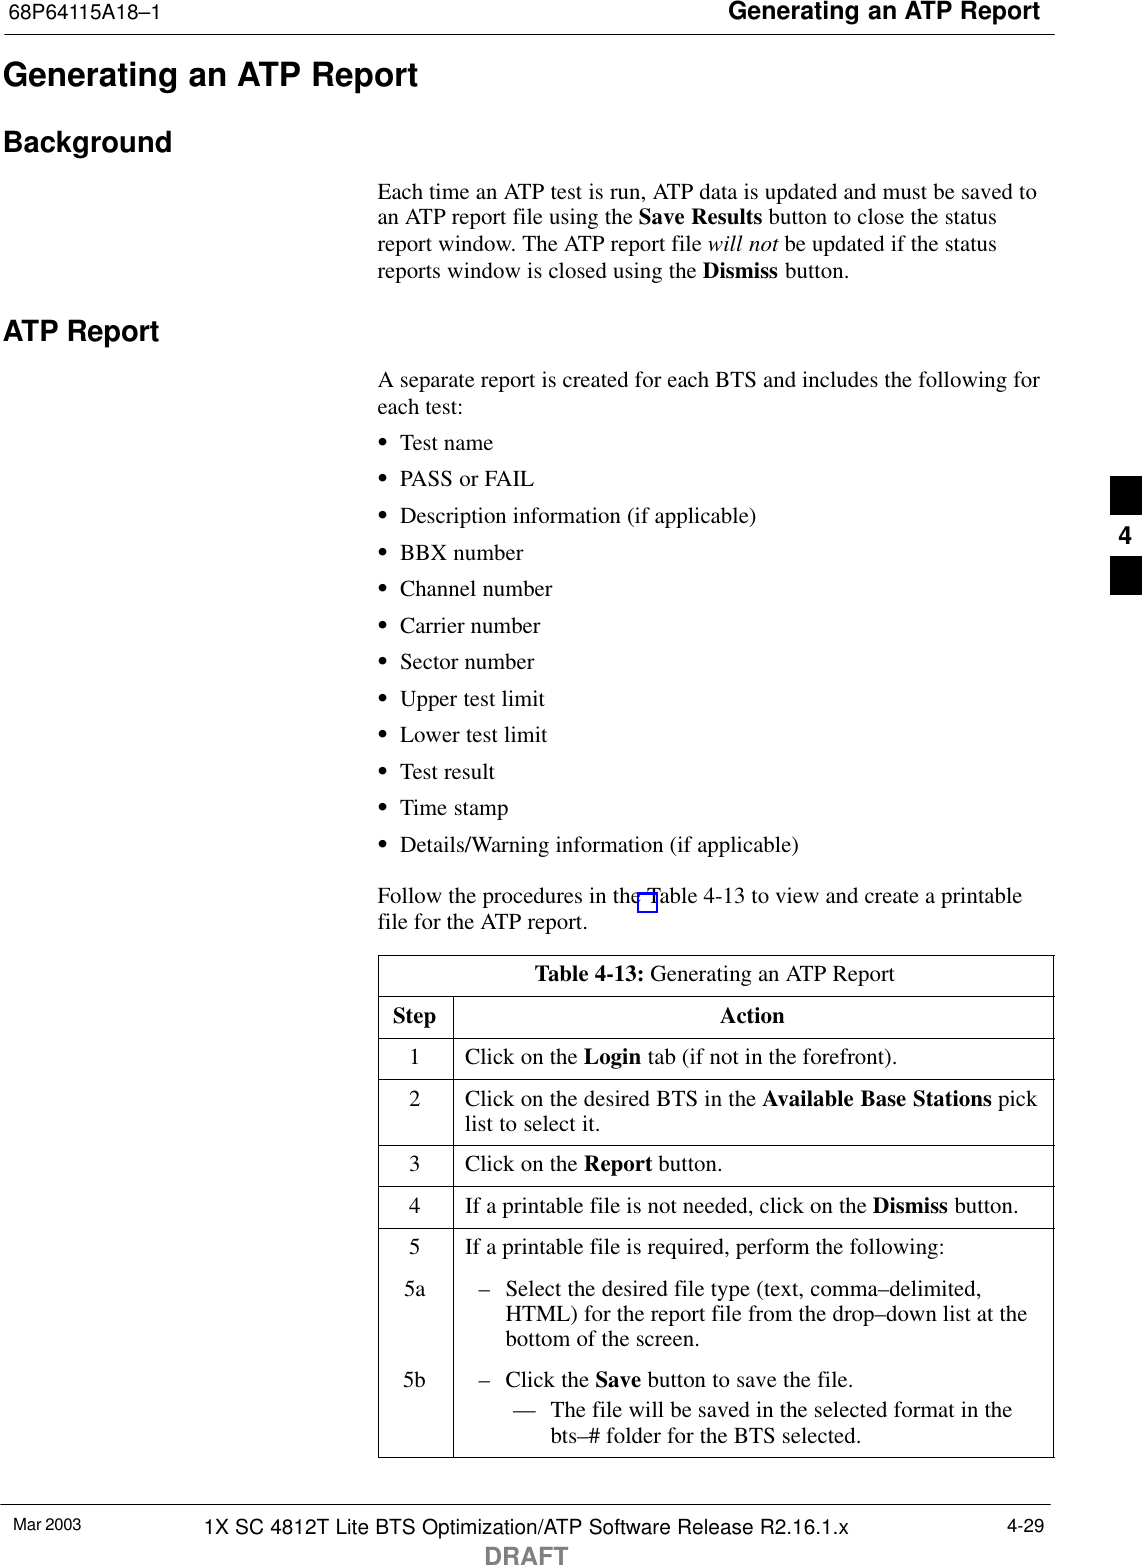 Generating an ATP Report68P64115A18–1Mar 2003 1X SC 4812T Lite BTS Optimization/ATP Software Release R2.16.1.xDRAFT4-29Generating an ATP ReportBackgroundEach time an ATP test is run, ATP data is updated and must be saved toan ATP report file using the Save Results button to close the statusreport window. The ATP report file will not be updated if the statusreports window is closed using the Dismiss button.ATP ReportA separate report is created for each BTS and includes the following foreach test:STest nameSPASS or FAILSDescription information (if applicable)SBBX numberSChannel numberSCarrier numberSSector numberSUpper test limitSLower test limitSTest resultSTime stampSDetails/Warning information (if applicable)Follow the procedures in the Table 4-13 to view and create a printablefile for the ATP report.Table 4-13: Generating an ATP ReportStep Action1Click on the Login tab (if not in the forefront).2Click on the desired BTS in the Available Base Stations picklist to select it.3Click on the Report button.4If a printable file is not needed, click on the Dismiss button.5If a printable file is required, perform the following:5a – Select the desired file type (text, comma–delimited,HTML) for the report file from the drop–down list at thebottom of the screen.5b – Click the Save button to save the file.–– The file will be saved in the selected format in thebts–# folder for the BTS selected. 4